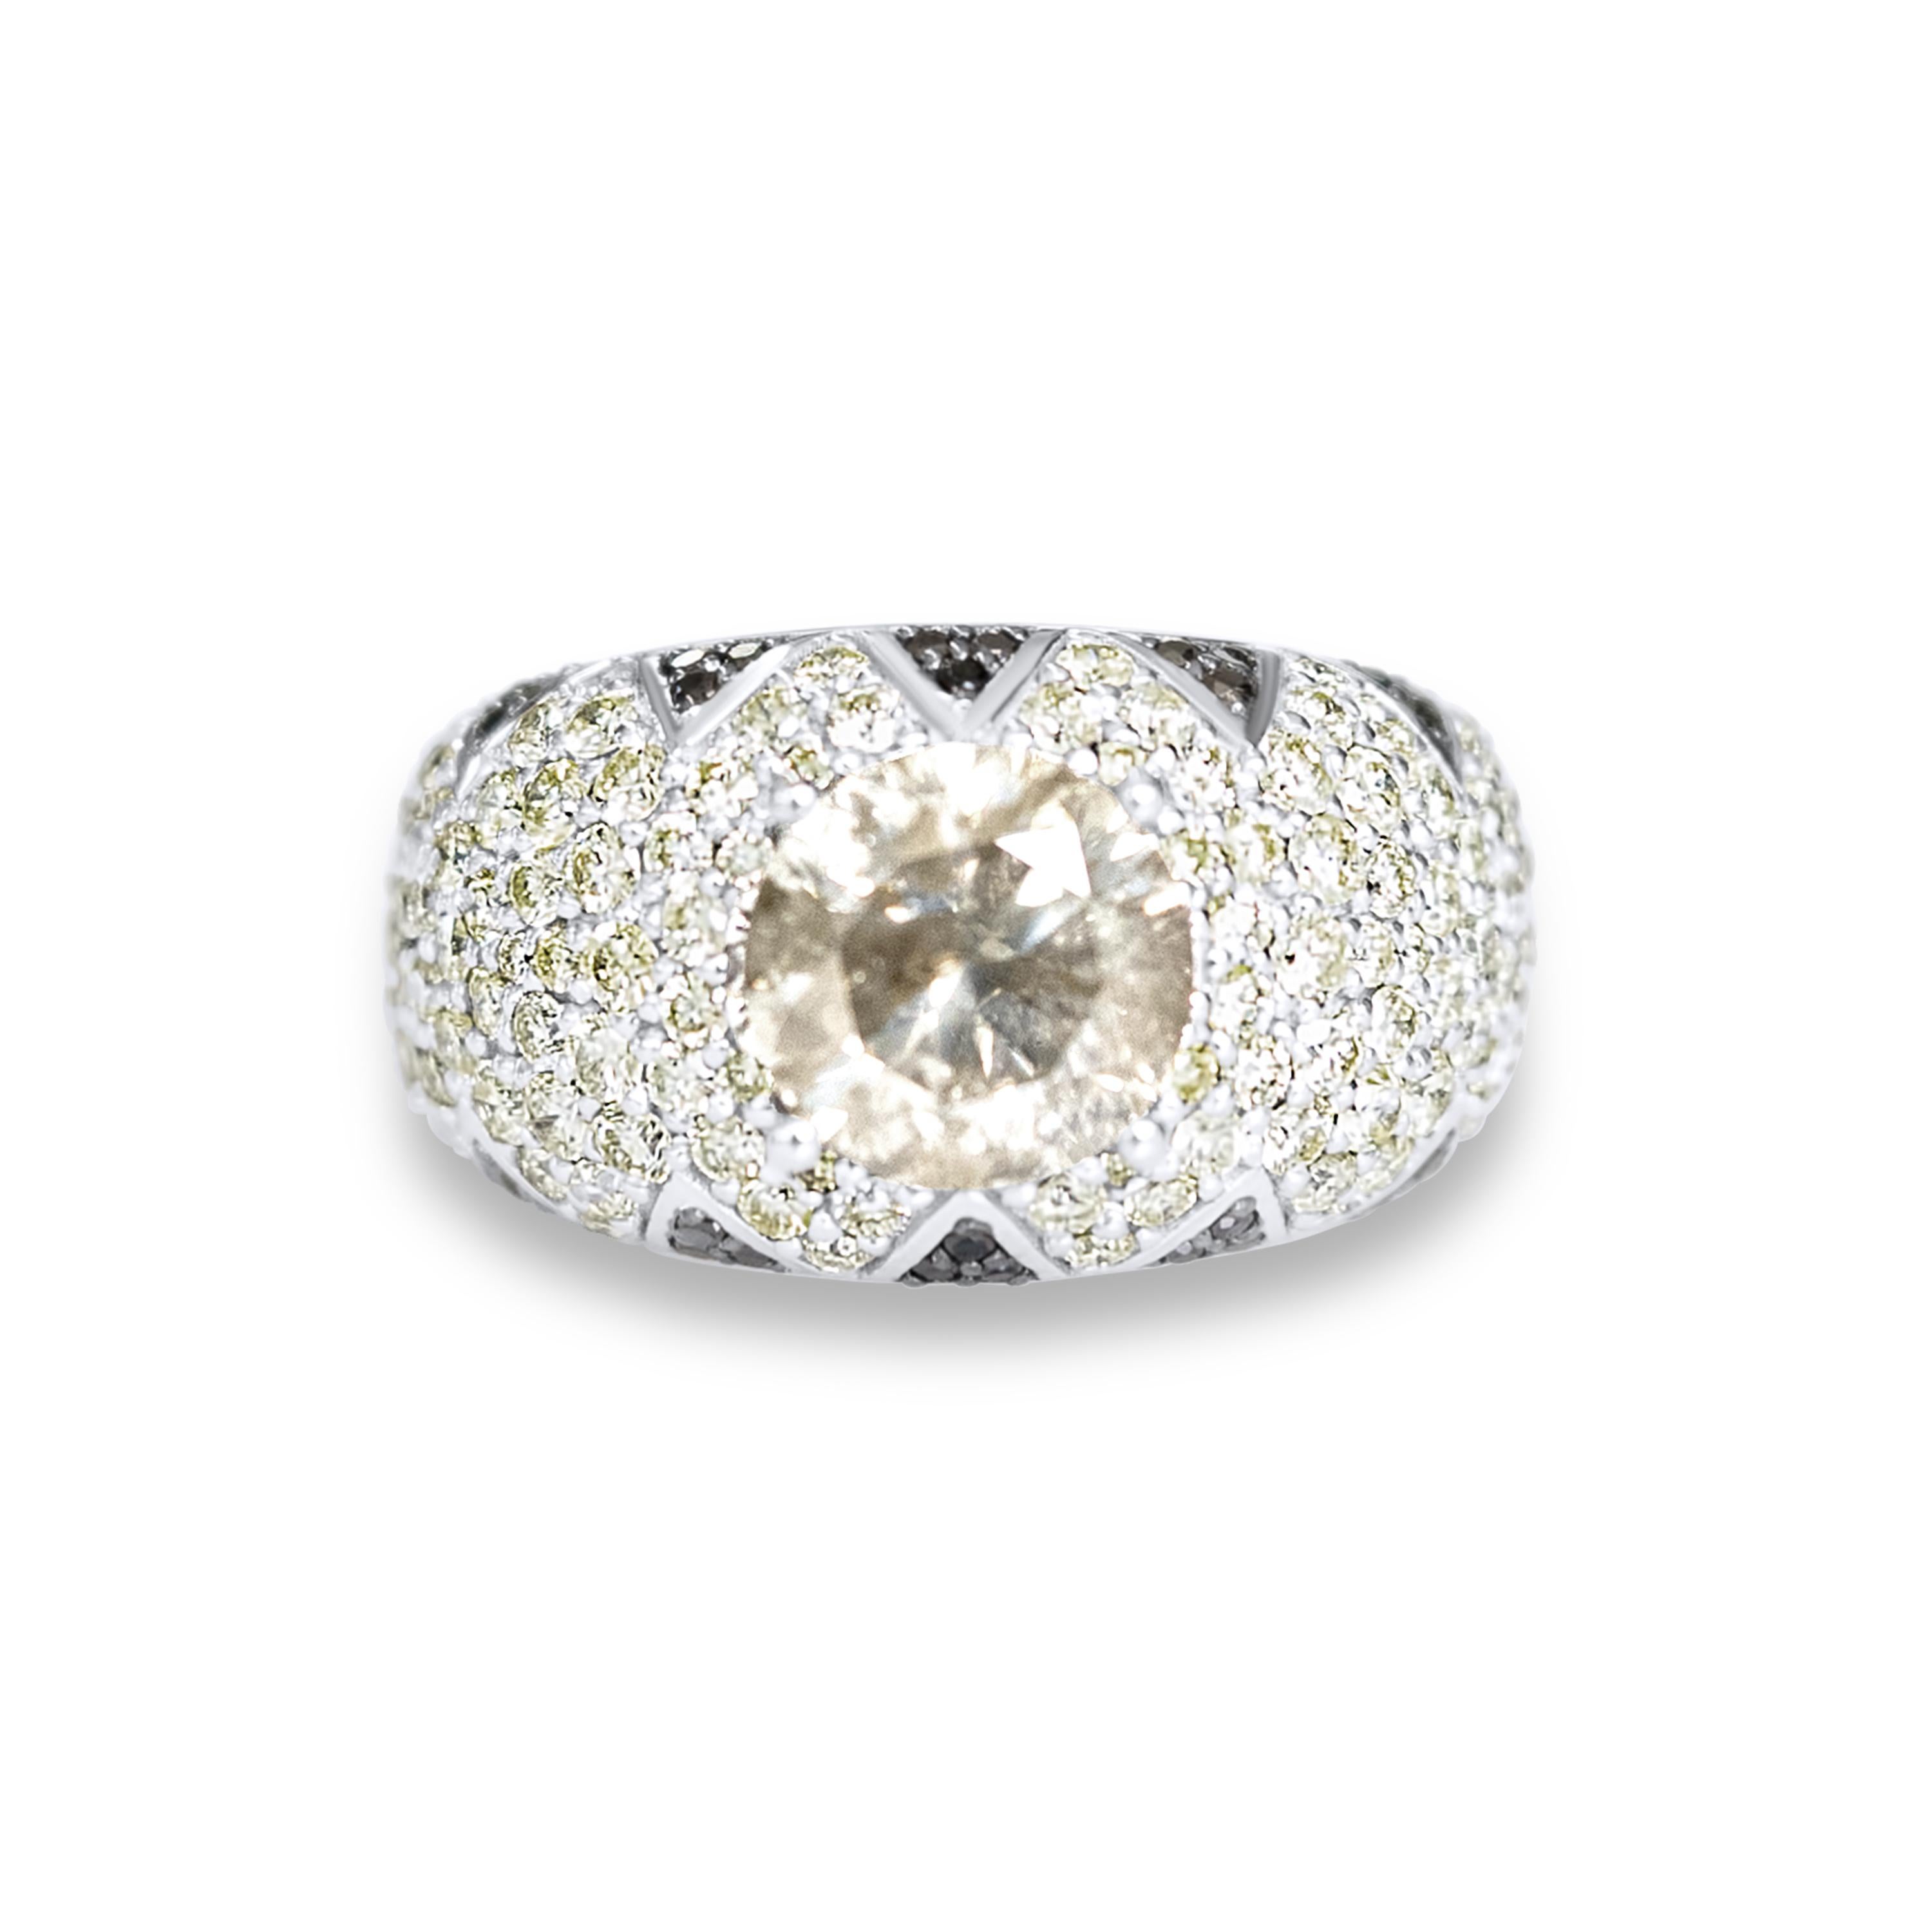 Lotus Bombe ring with 2.53 ct champagne diamond solitaire & black diamond petals In New Condition For Sale In Houston, TX